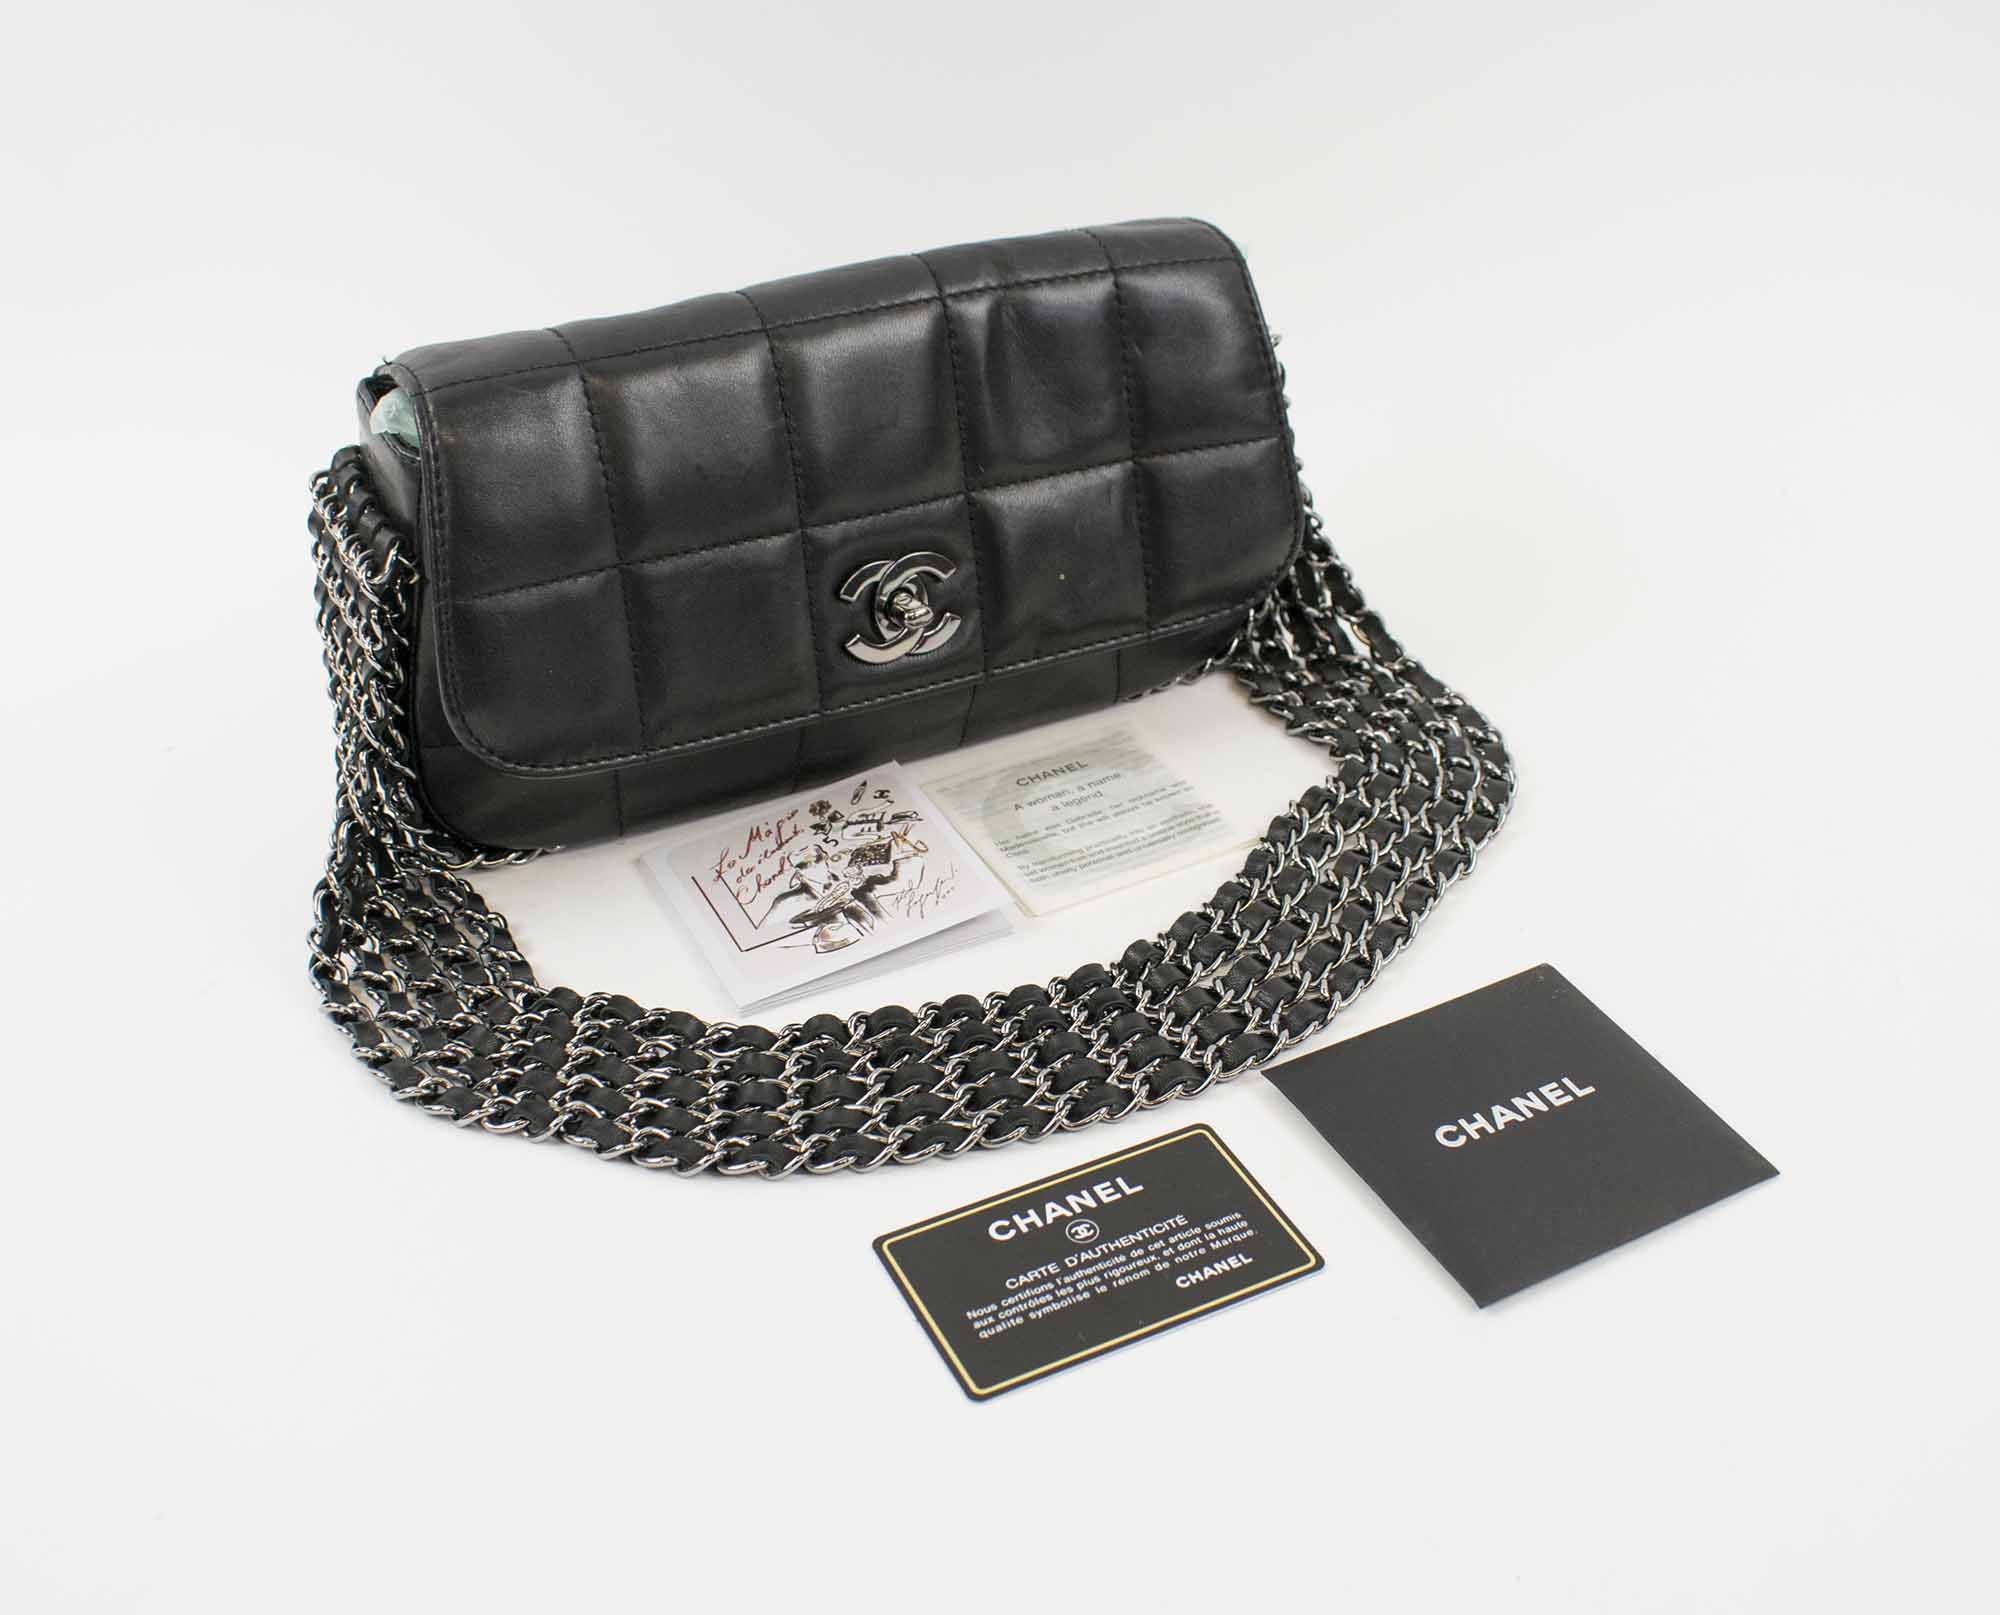 CHANEL CC LOGO BLACK QUILTED SATIN JEWELED CHAIN ROUND EVENING BAG